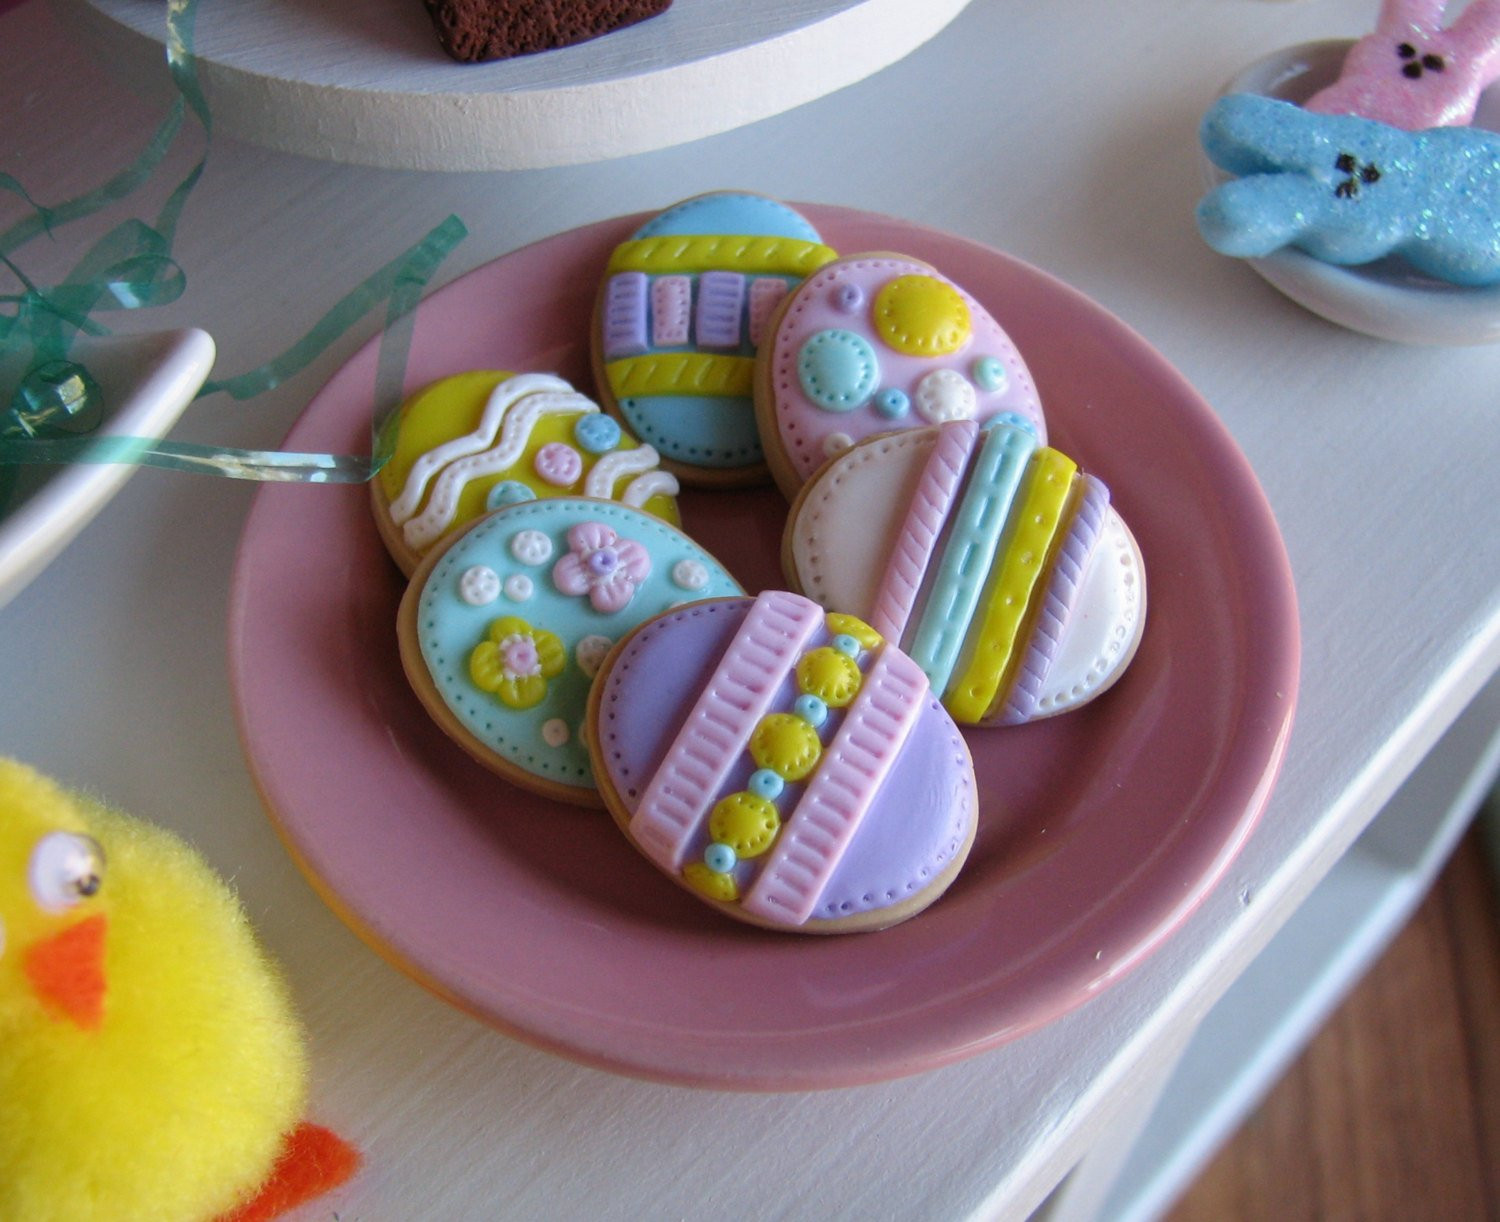 Easter Decorated Sugar Cookies
 Decorated Easter Egg Sugar Cookies sized for the American